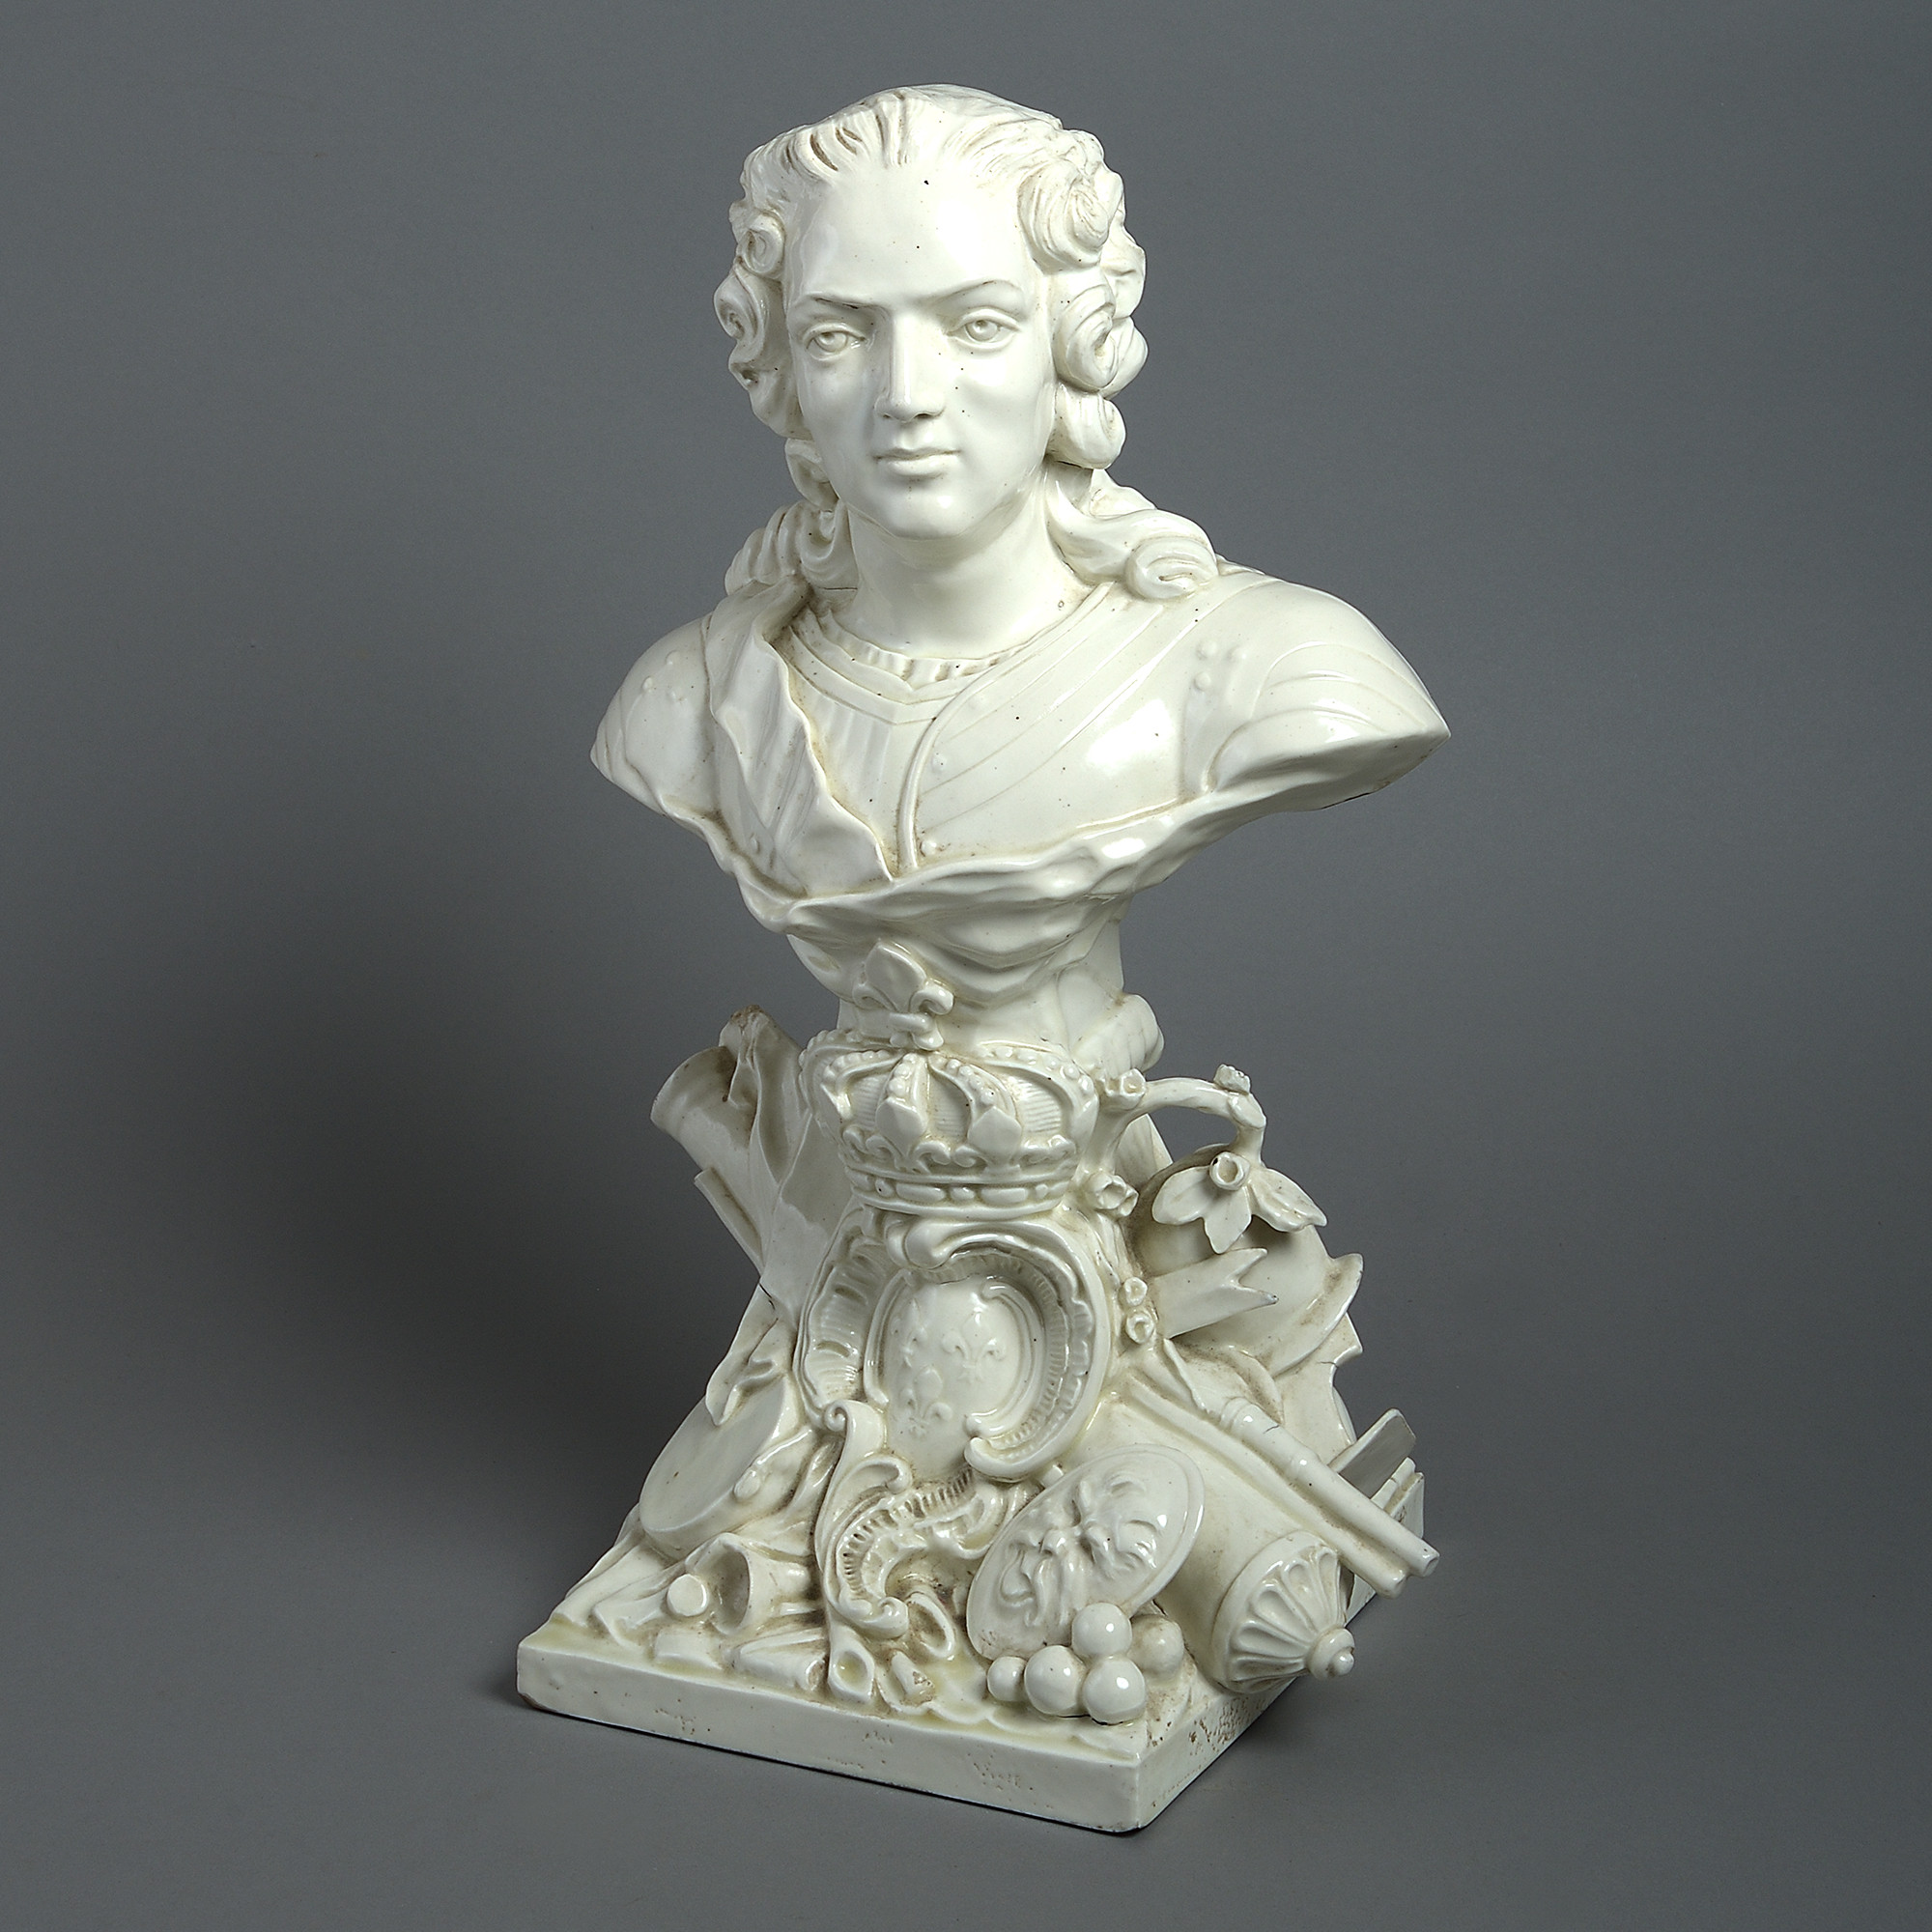 Bust of Louis XV of France